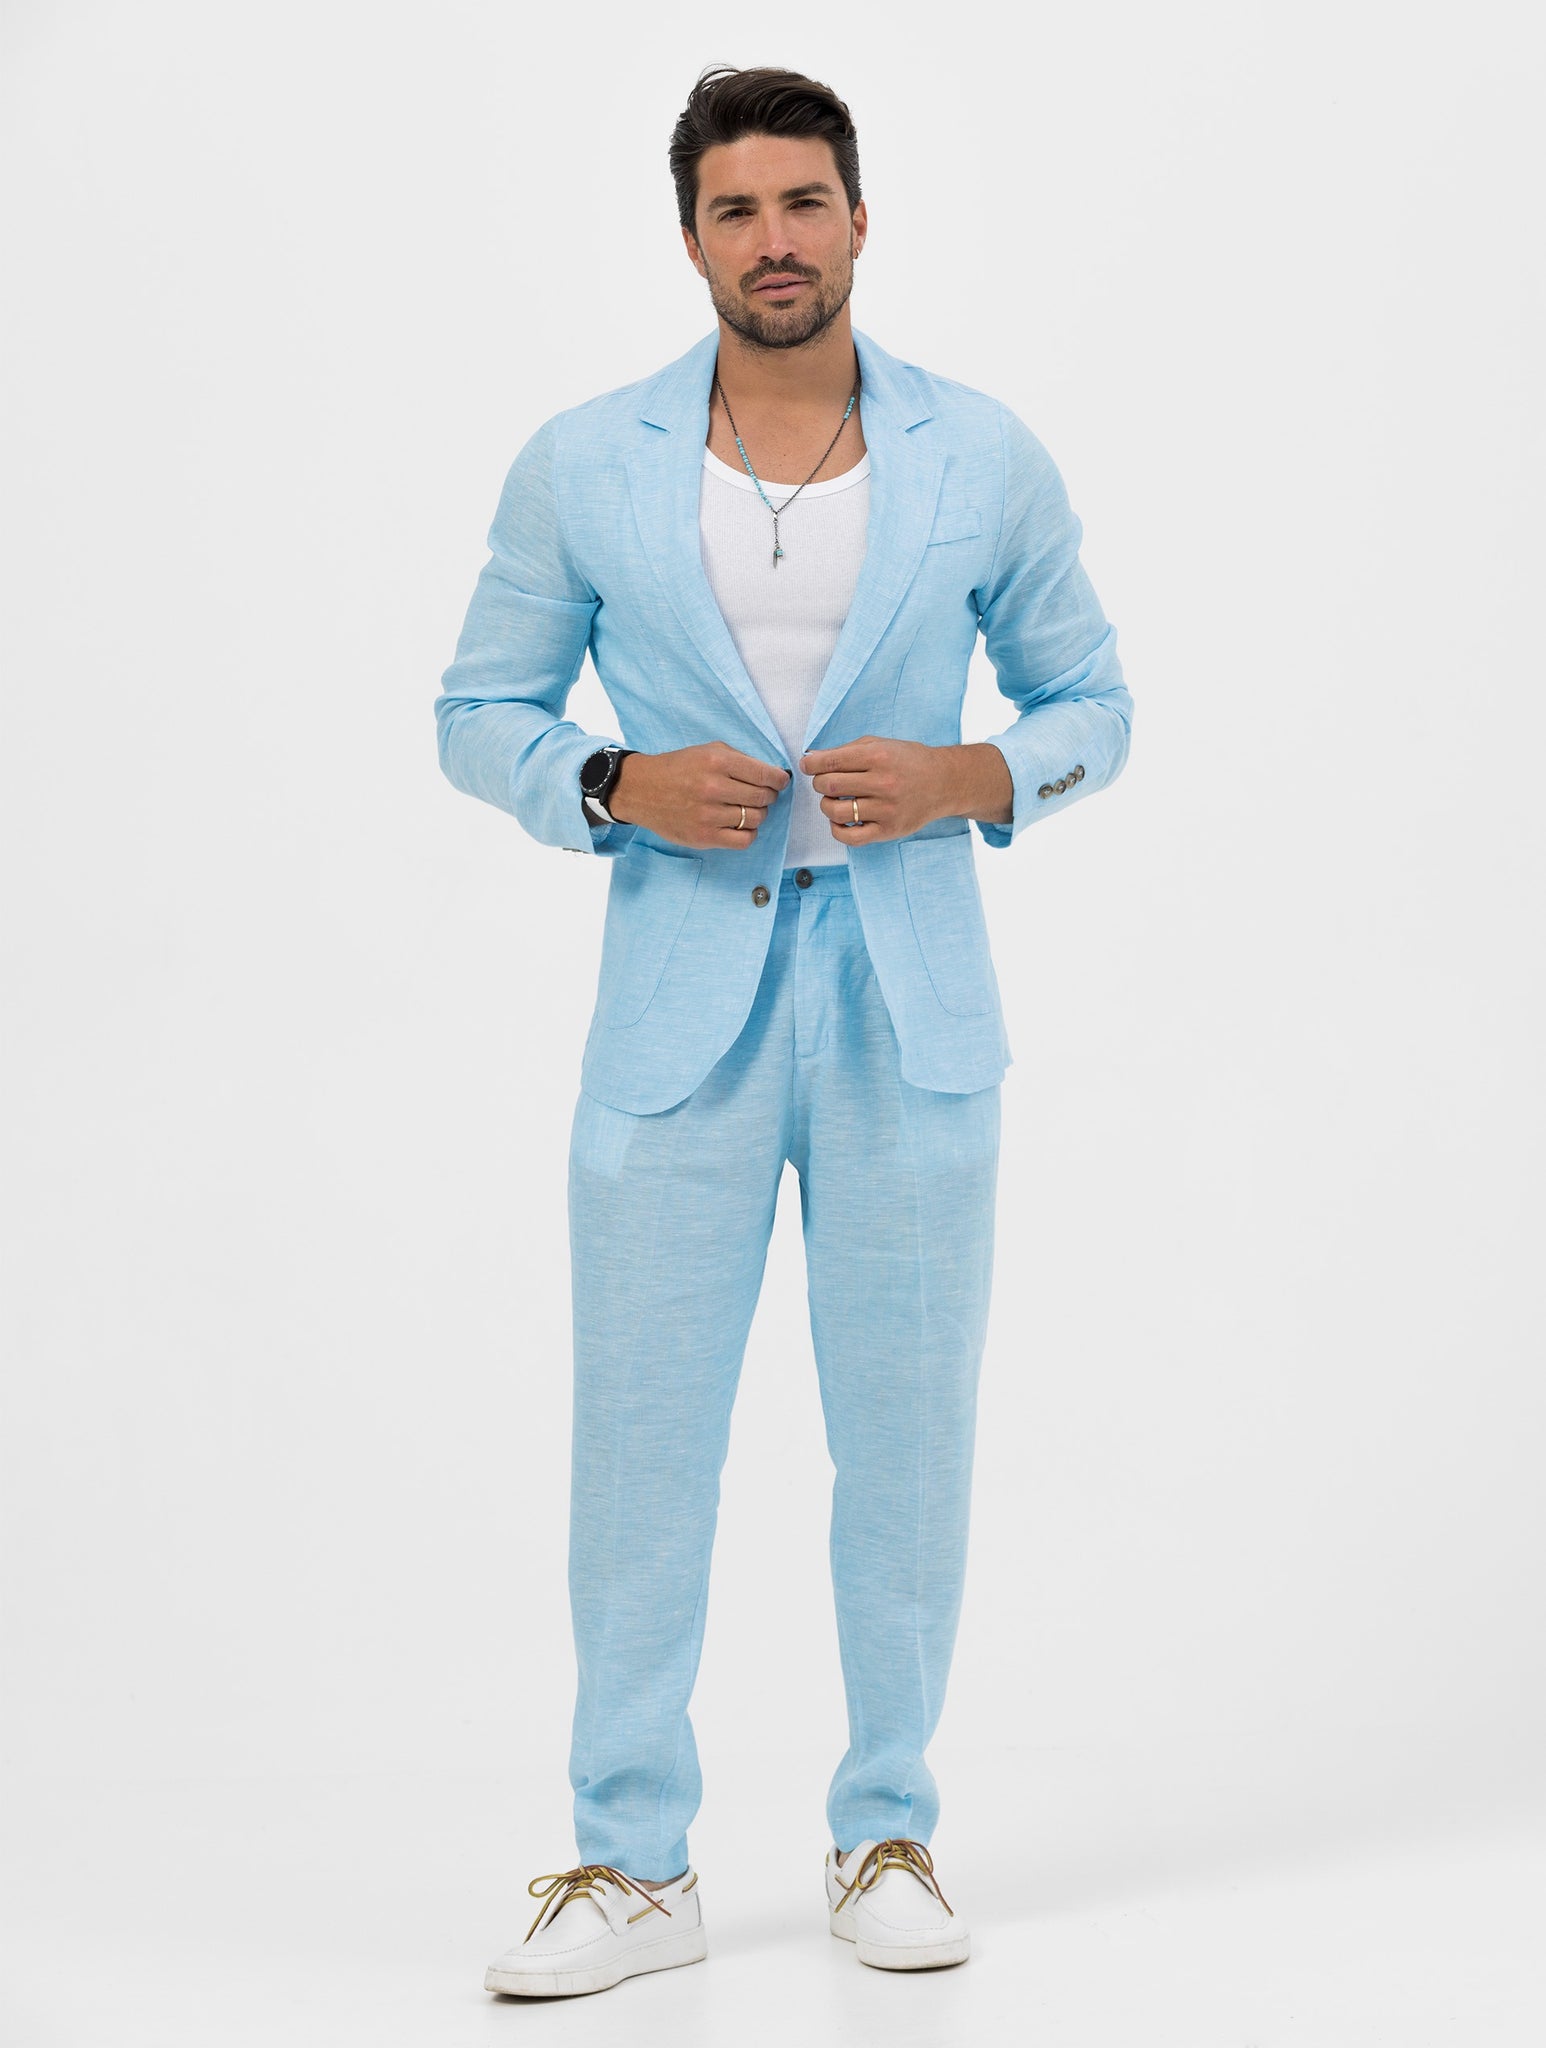 FEDRO SINGLE BREASTED SUIT IN TURQUOISE